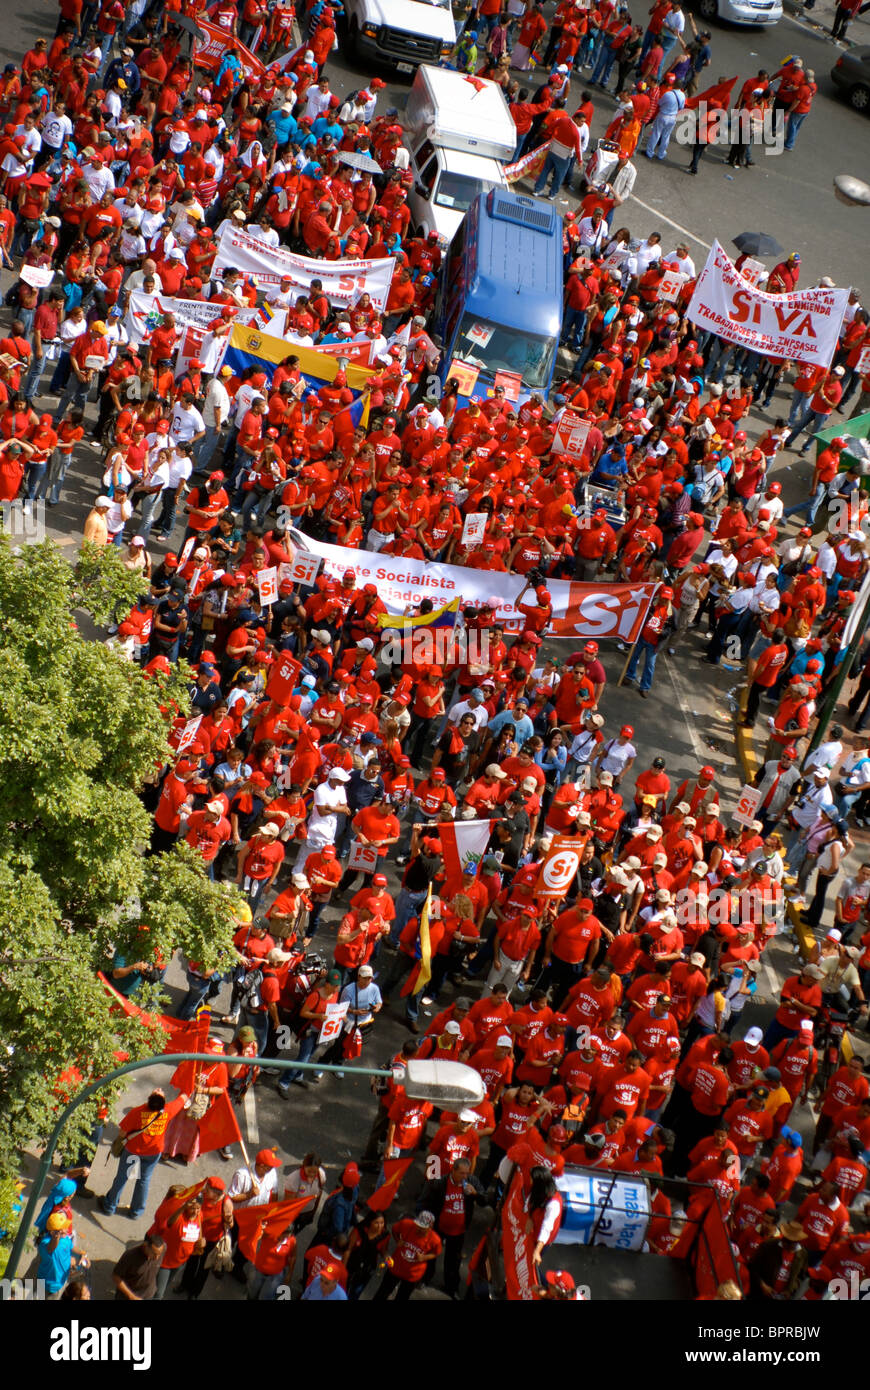 Supporters rally in the streets for the end of presidential term limits in Caracas, Venezuela. Stock Photo